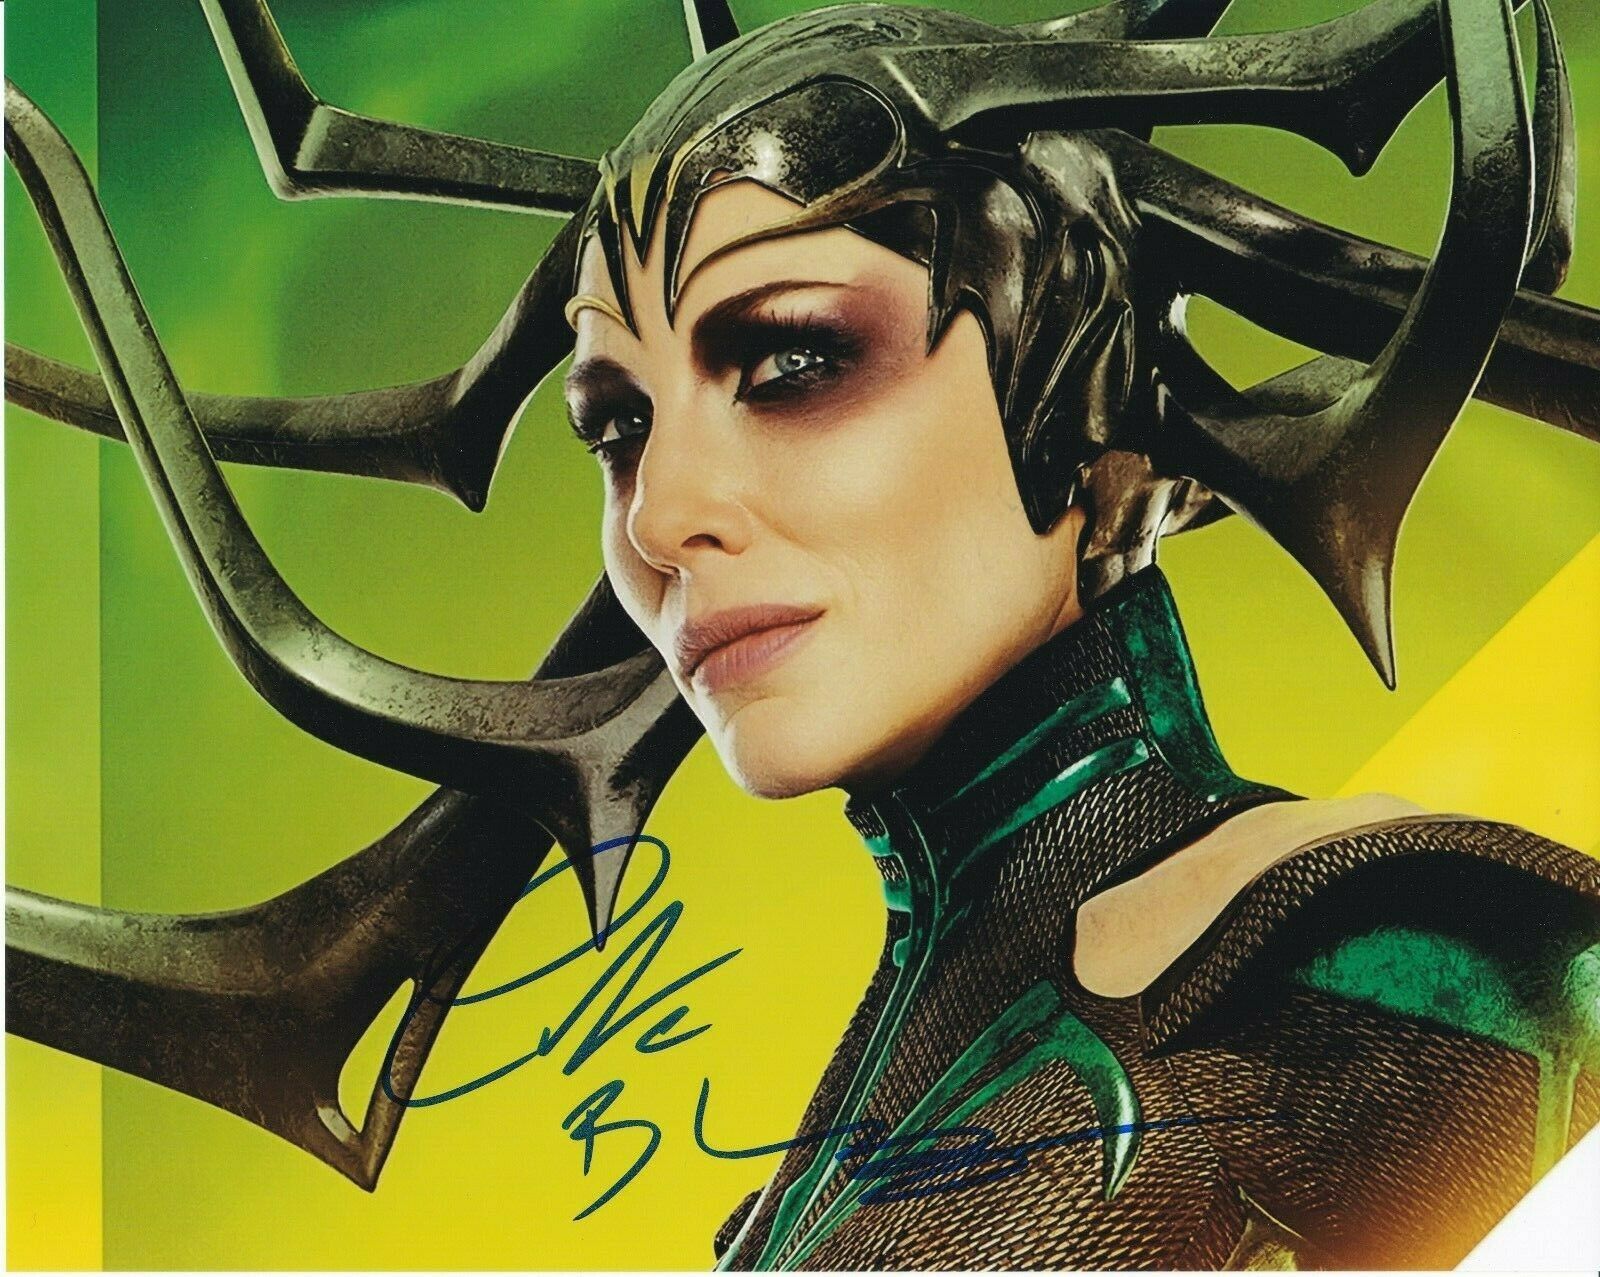 Thor Cate Blanchett Autographed 8x10 Photograph Rp